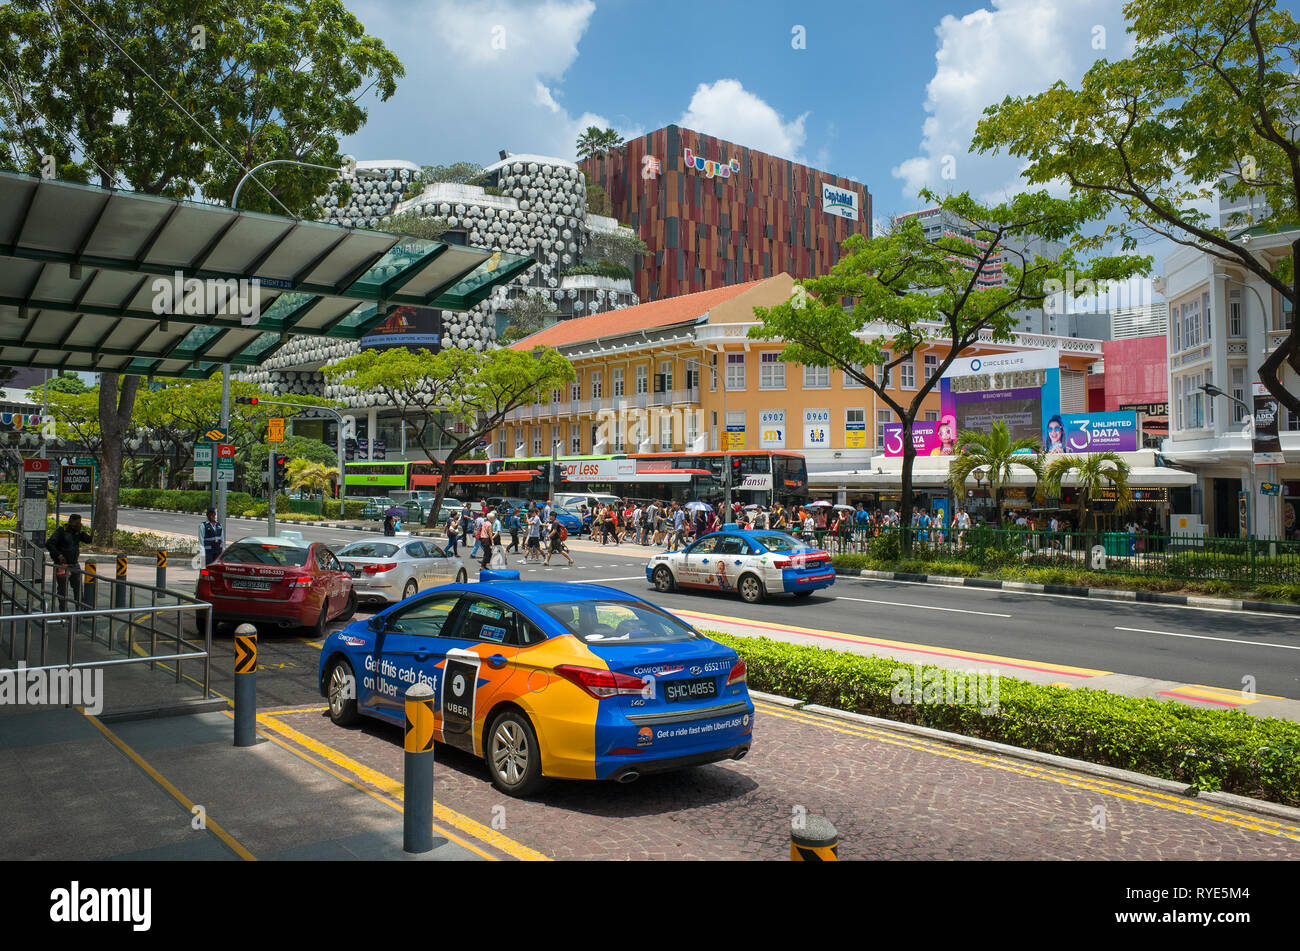 Taxi queue and colorful cityscape on road by Bugis mall, Singapore Stock Photo